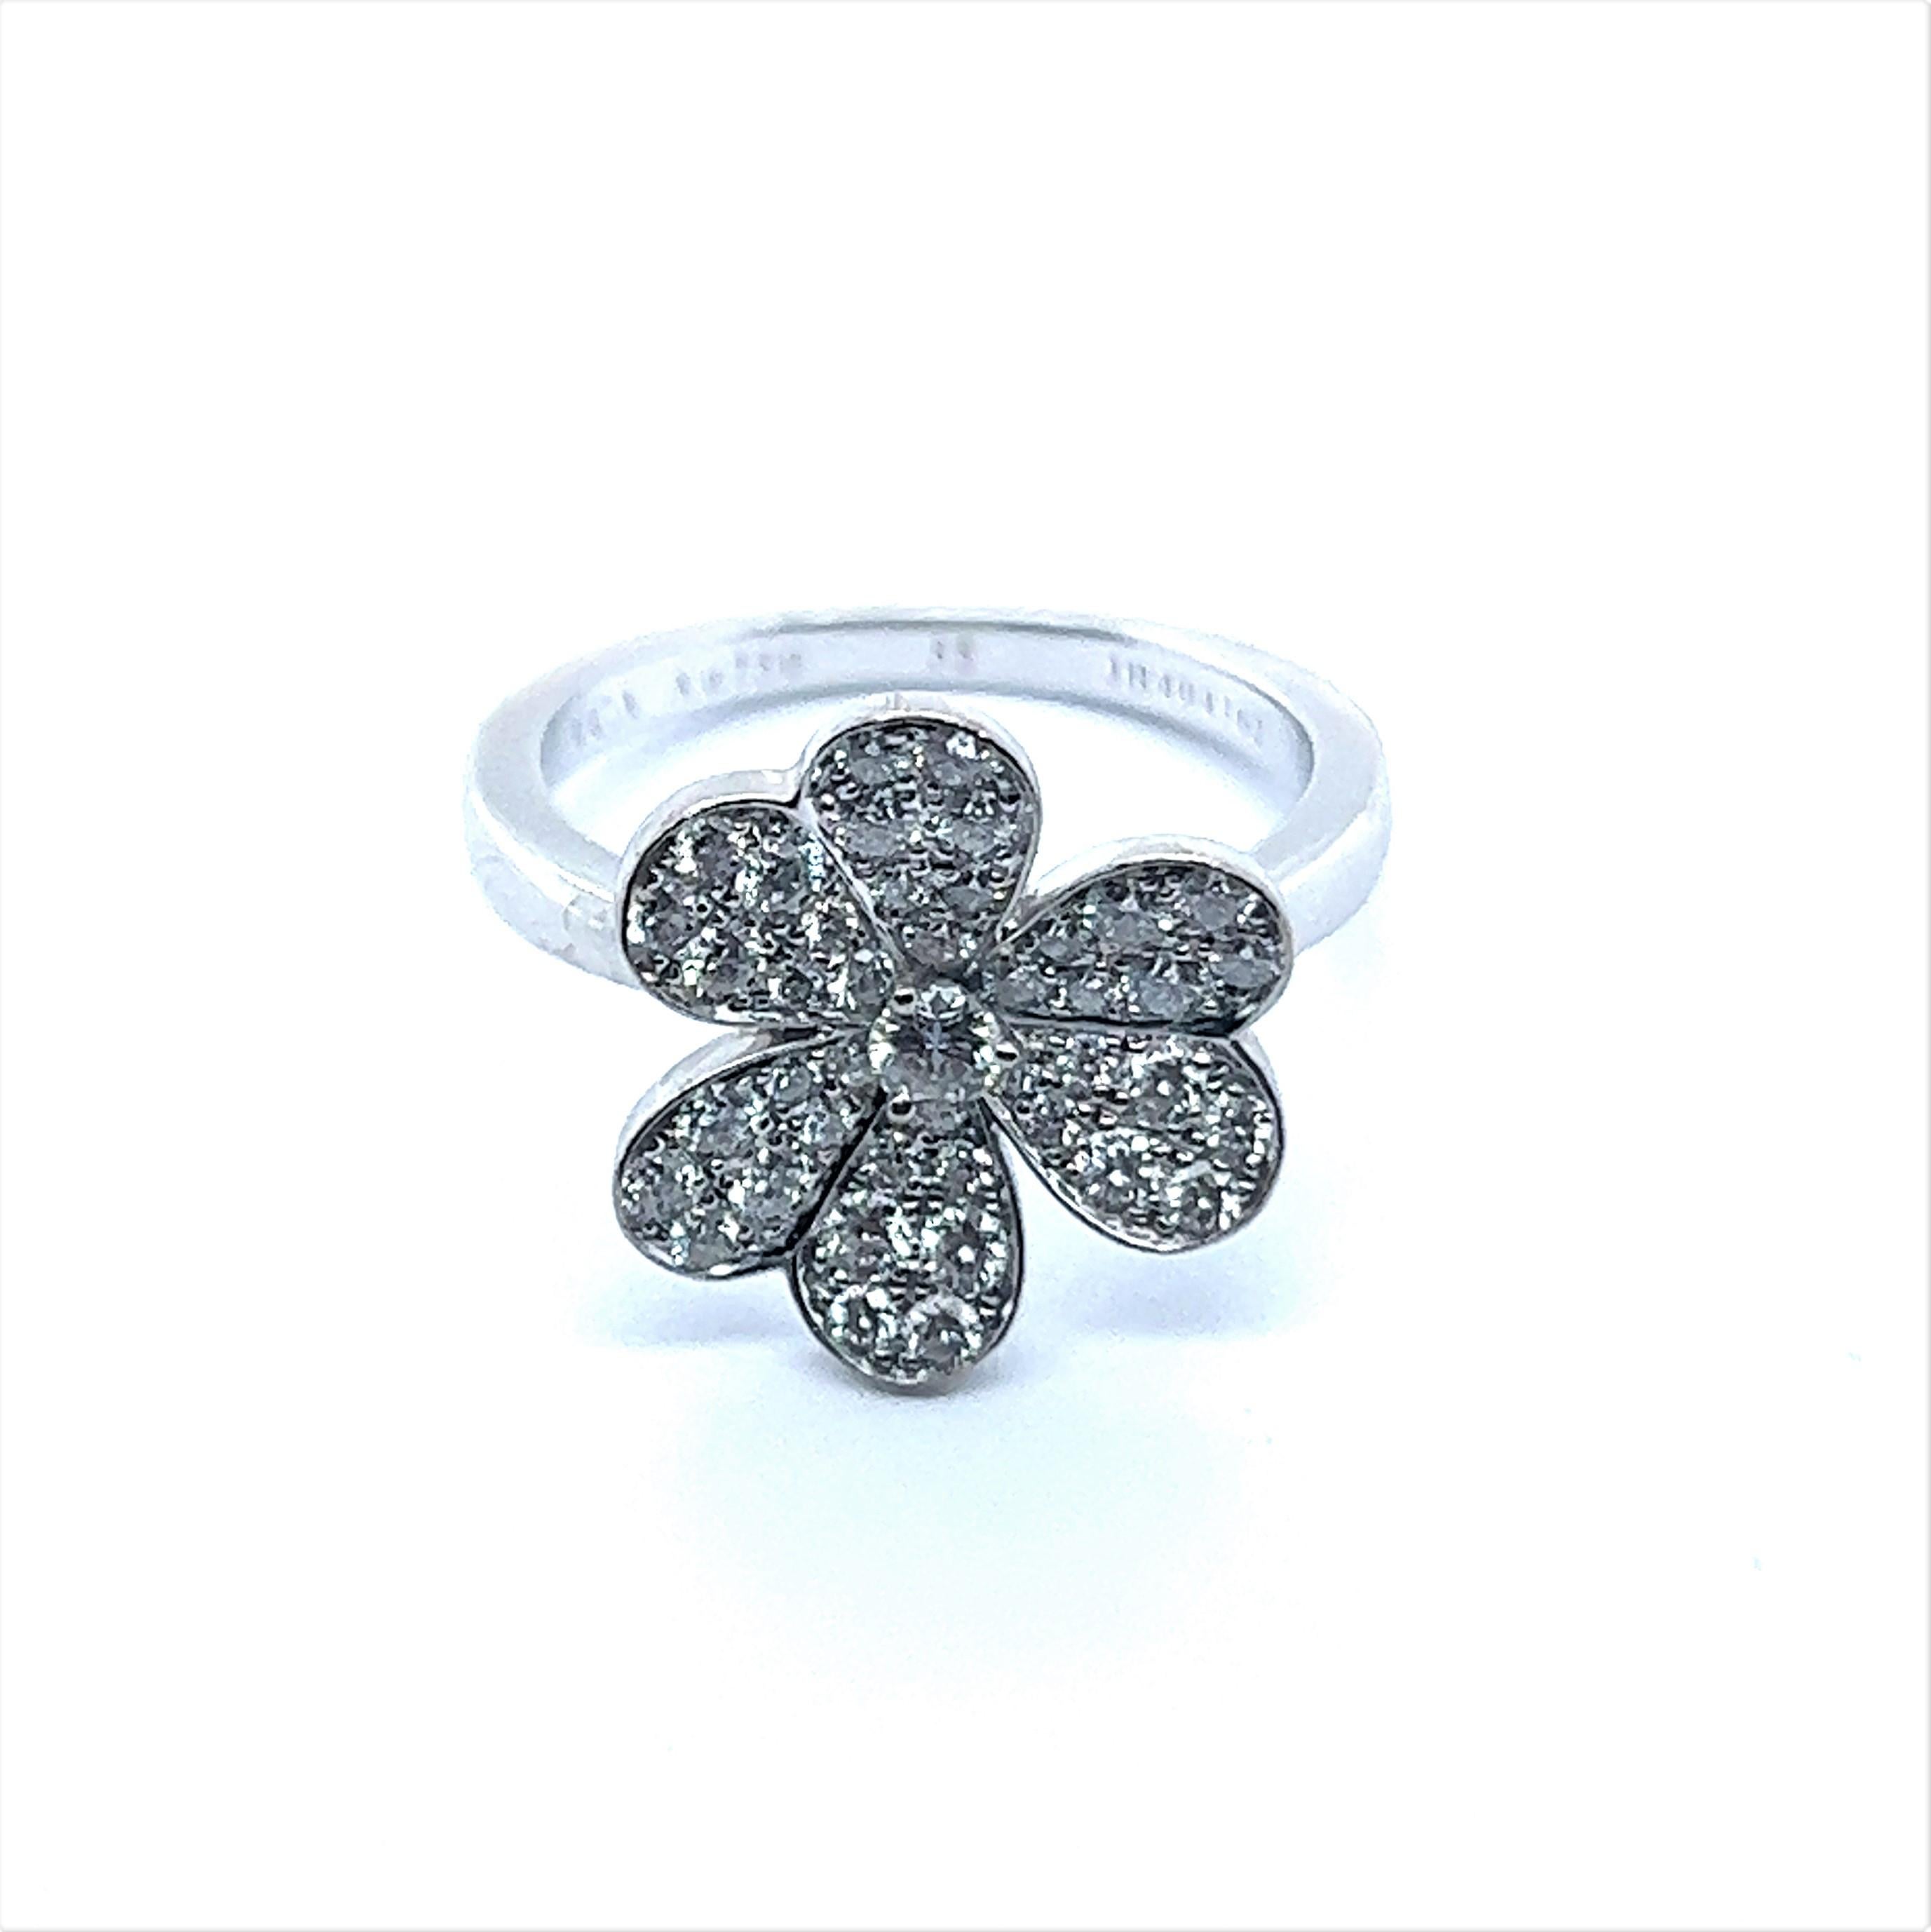 A charming floral ring from the iconic Frivole collection. 

This classic line was created by famous Jewelry House Van Cleef & Arpels and is inspired by the delicate beauty of nature at its most elegant manner. The name 